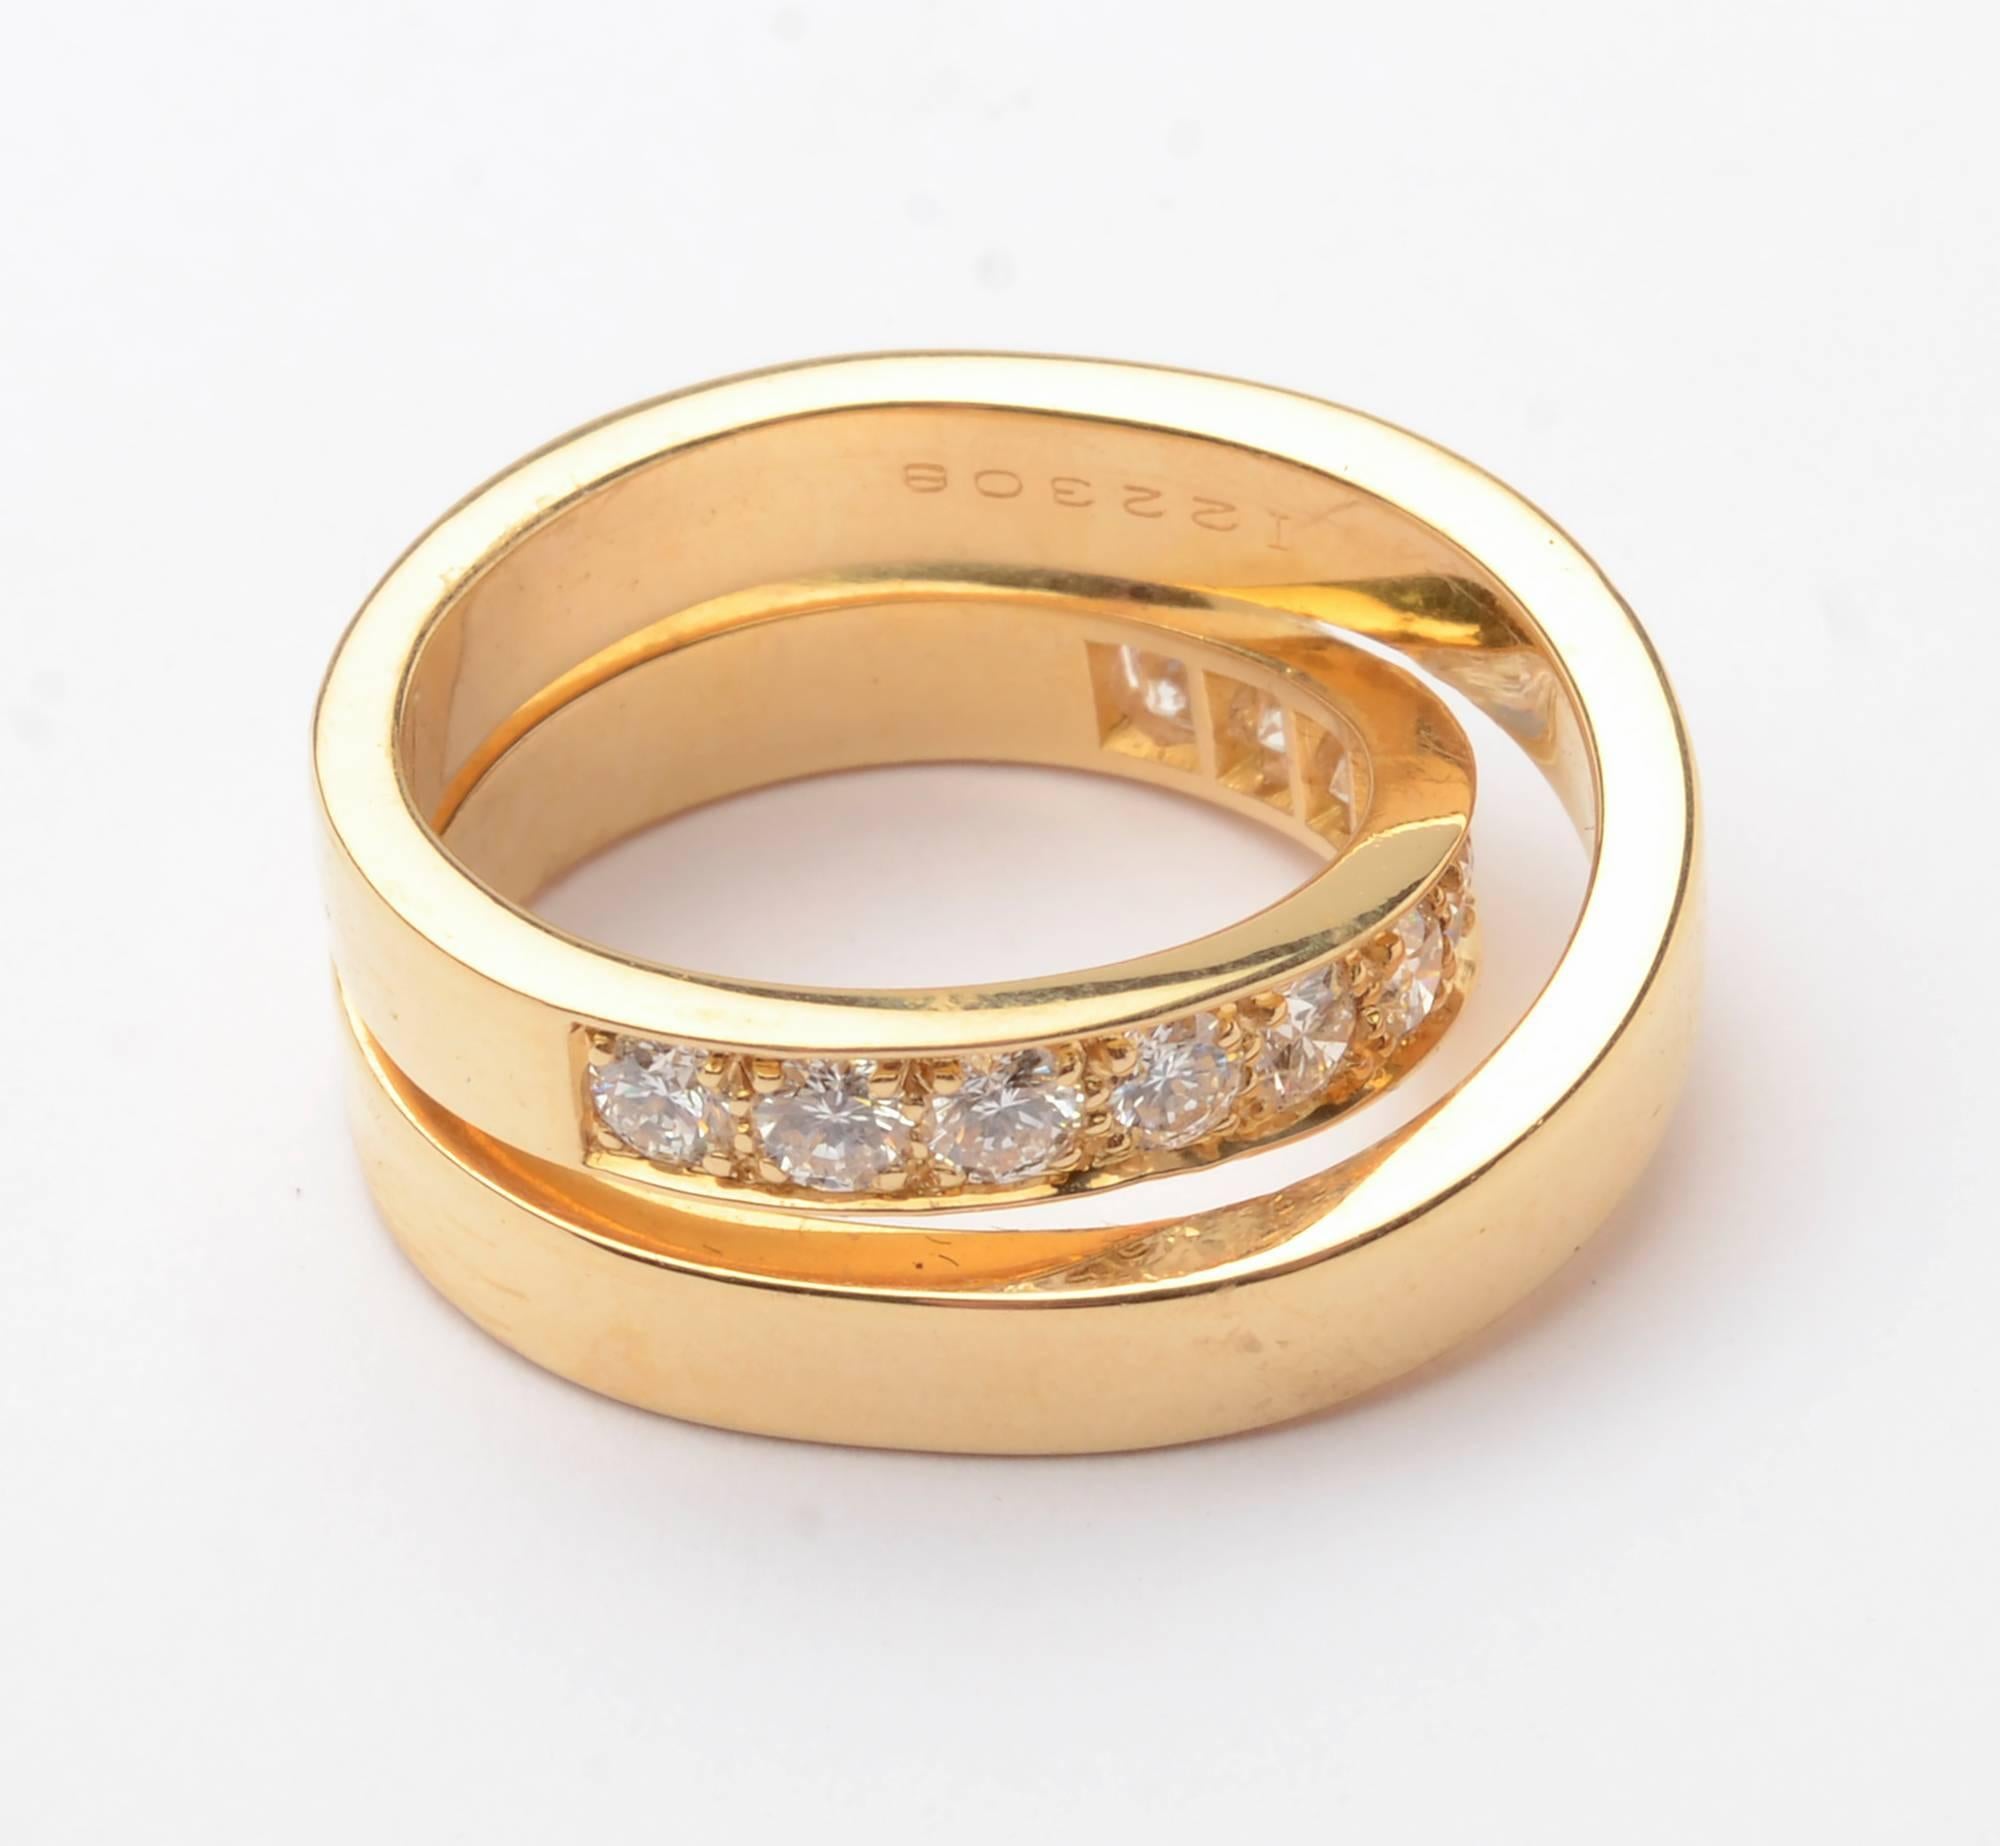 Cartier Nouvelle Vague crossover ring in yellow gold. It has 12 VS diamonds weighing a total of 1.2 carats. Ring is size 6 3/4 but can be sized up or down.